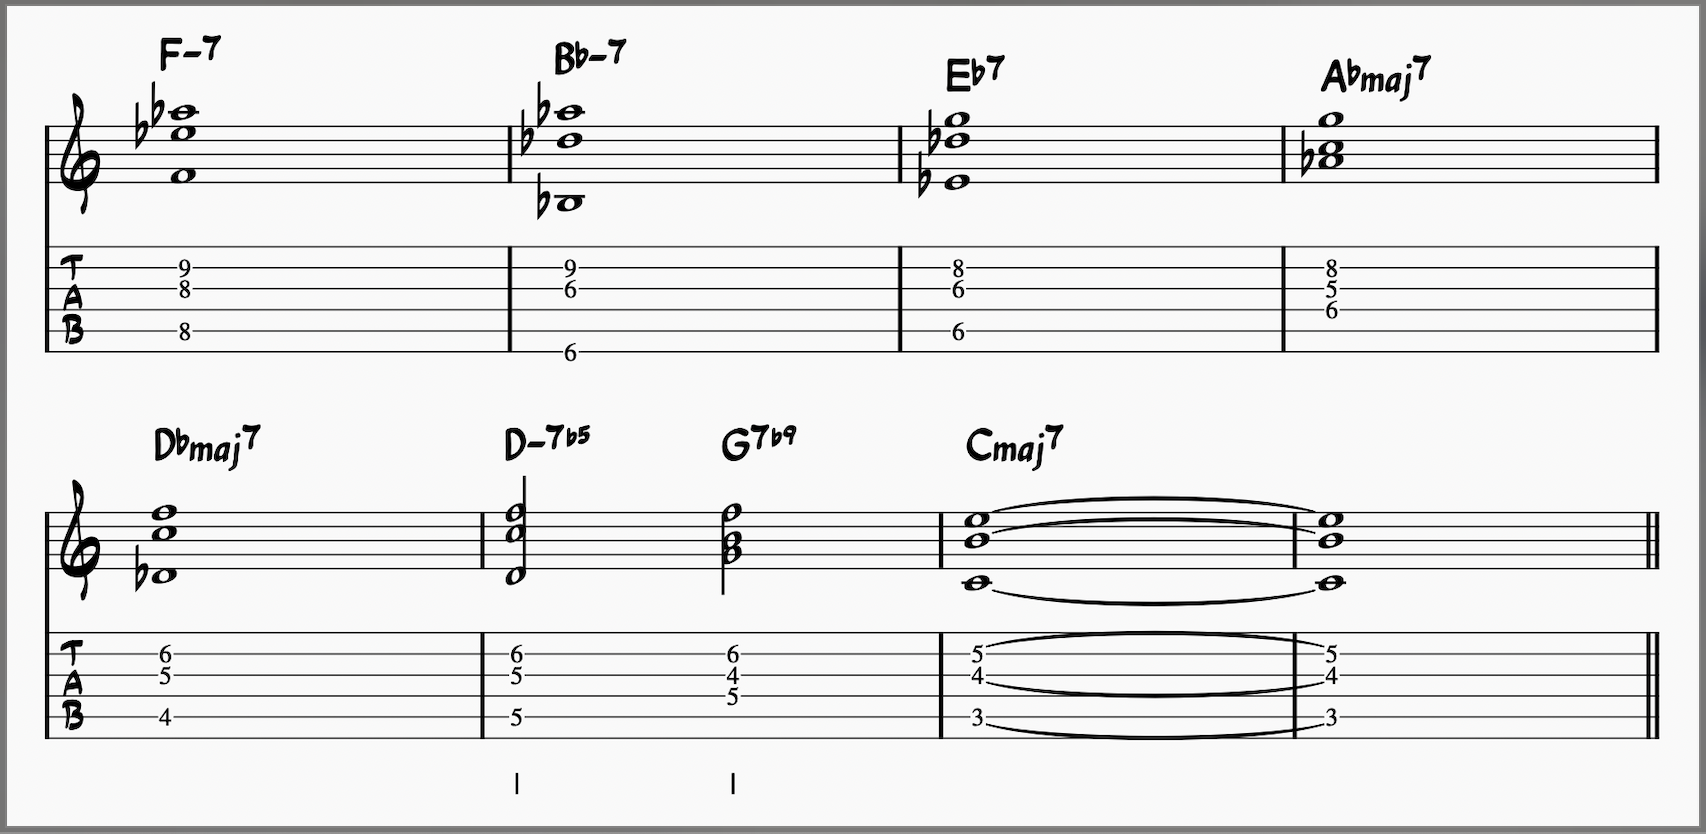 shell voicings applied to the first eight measures of All the Things You Are on guitar